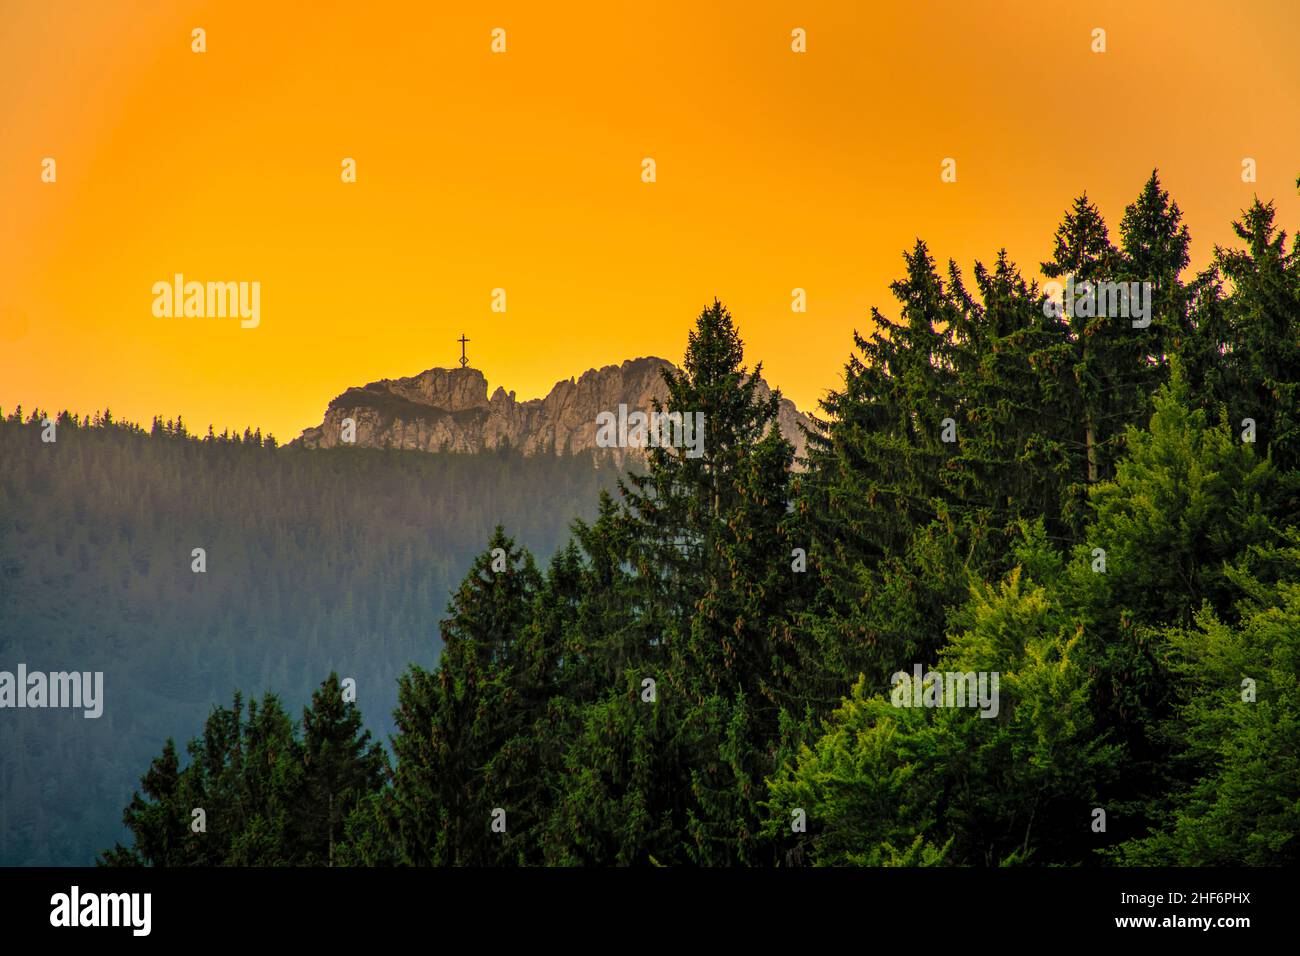 View at the Kampenwand cross at a wonderful golden hour light from far away at the peak of the alpine mountain peak. Stock Photo